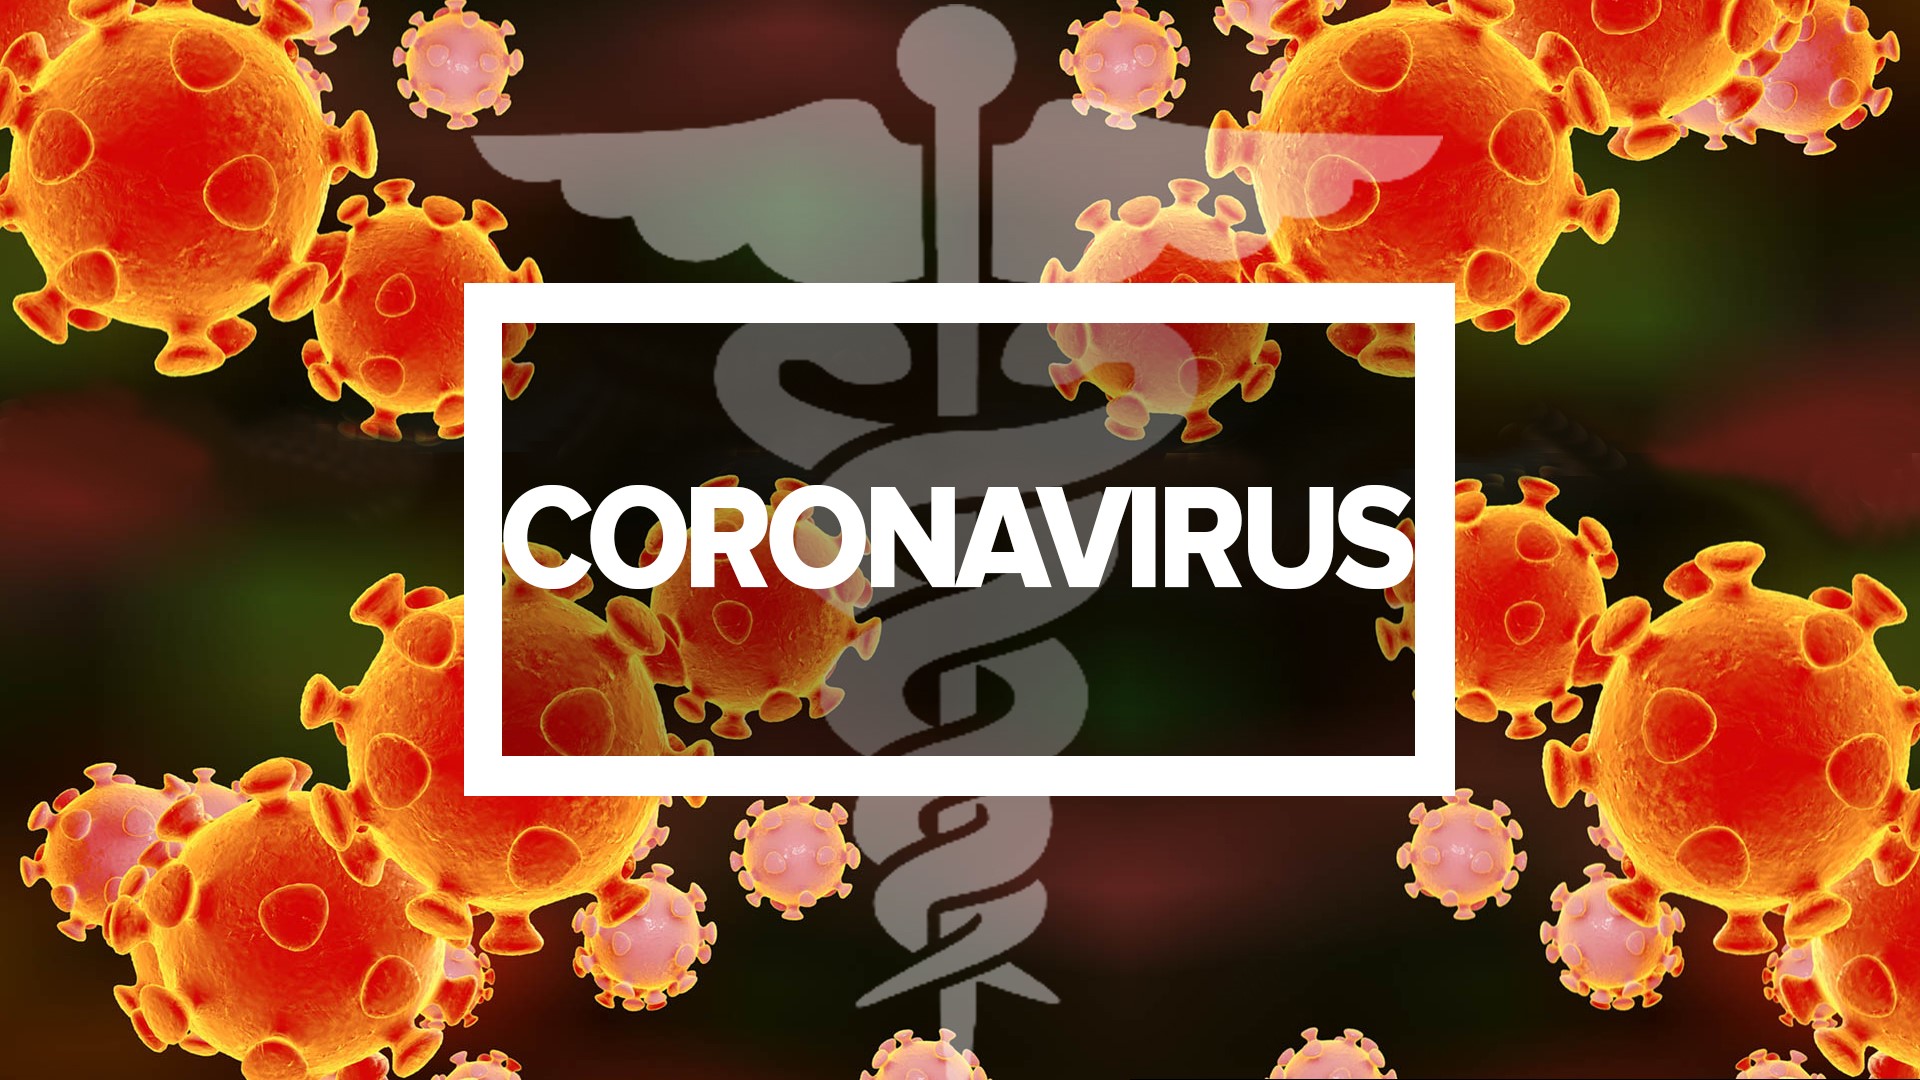 The Department of Health reports 10 new deaths in Pennsylvania related to the coronavirus.